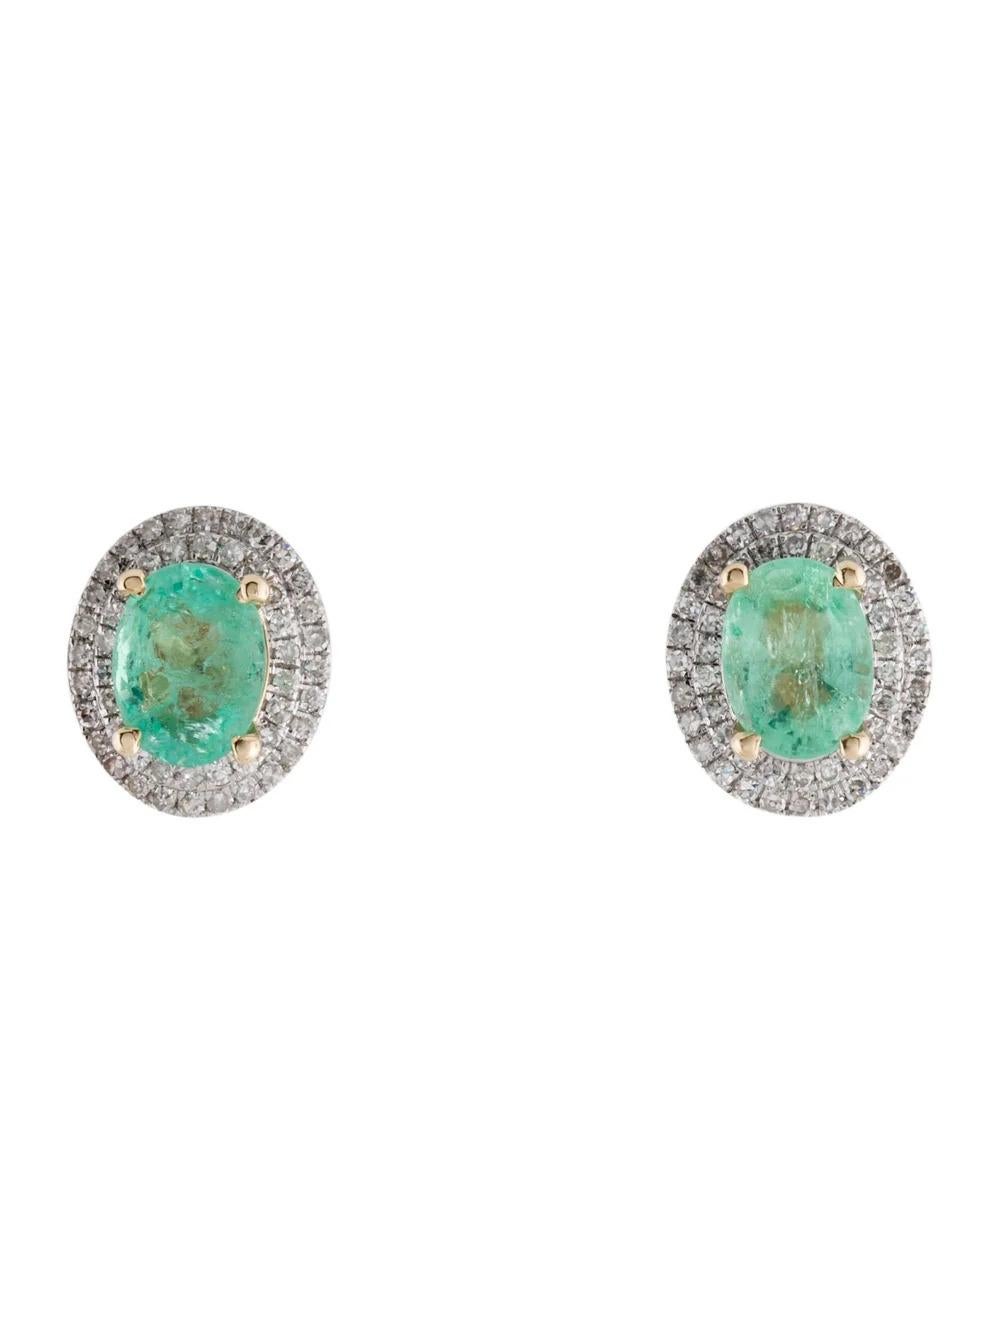 This stunning pair of earrings combines the timeless elegance of emeralds with the brilliance of diamonds, creating a captivating accessory that is sure to turn heads. Crafted in rhodium-plated 14K yellow gold, these earrings exude luxury and